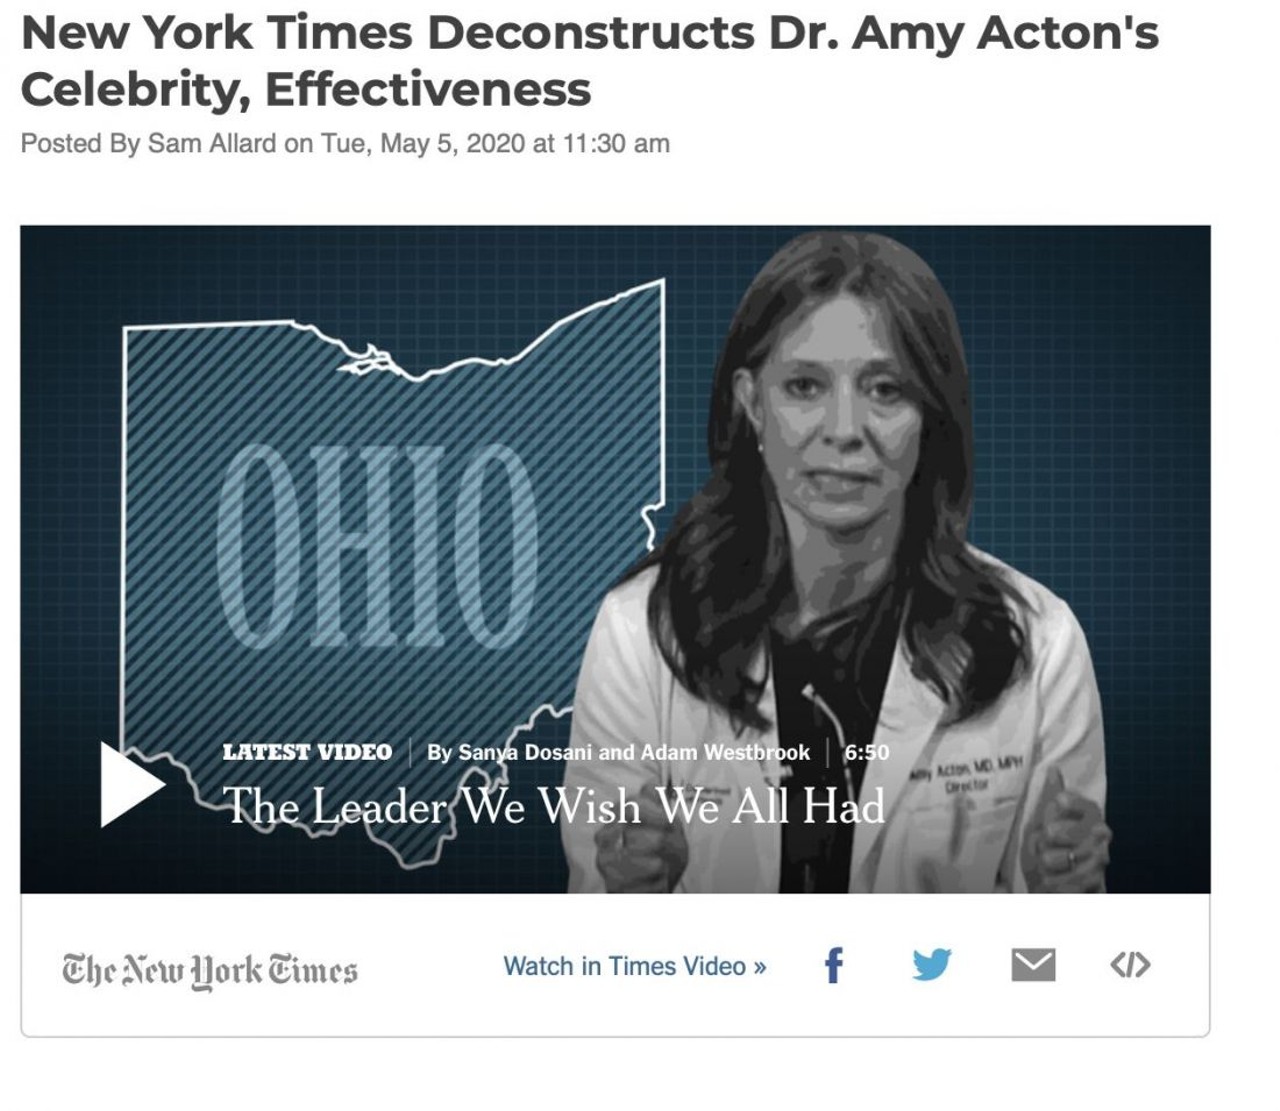  &#147;New York Times Deconstructs Dr. Amy Acton's Celebrity, Effectiveness&#148;
June 25th
&#147;While she is by no means the only factor, Acton's leadership and early aggressive recommendations, (and the generally receptive ears of Gov. Mike DeWine), has led to far fewer total deaths in Ohio than in other states with similarly sized population, including neighboring Michigan&#148;
Photo via Scene Archives